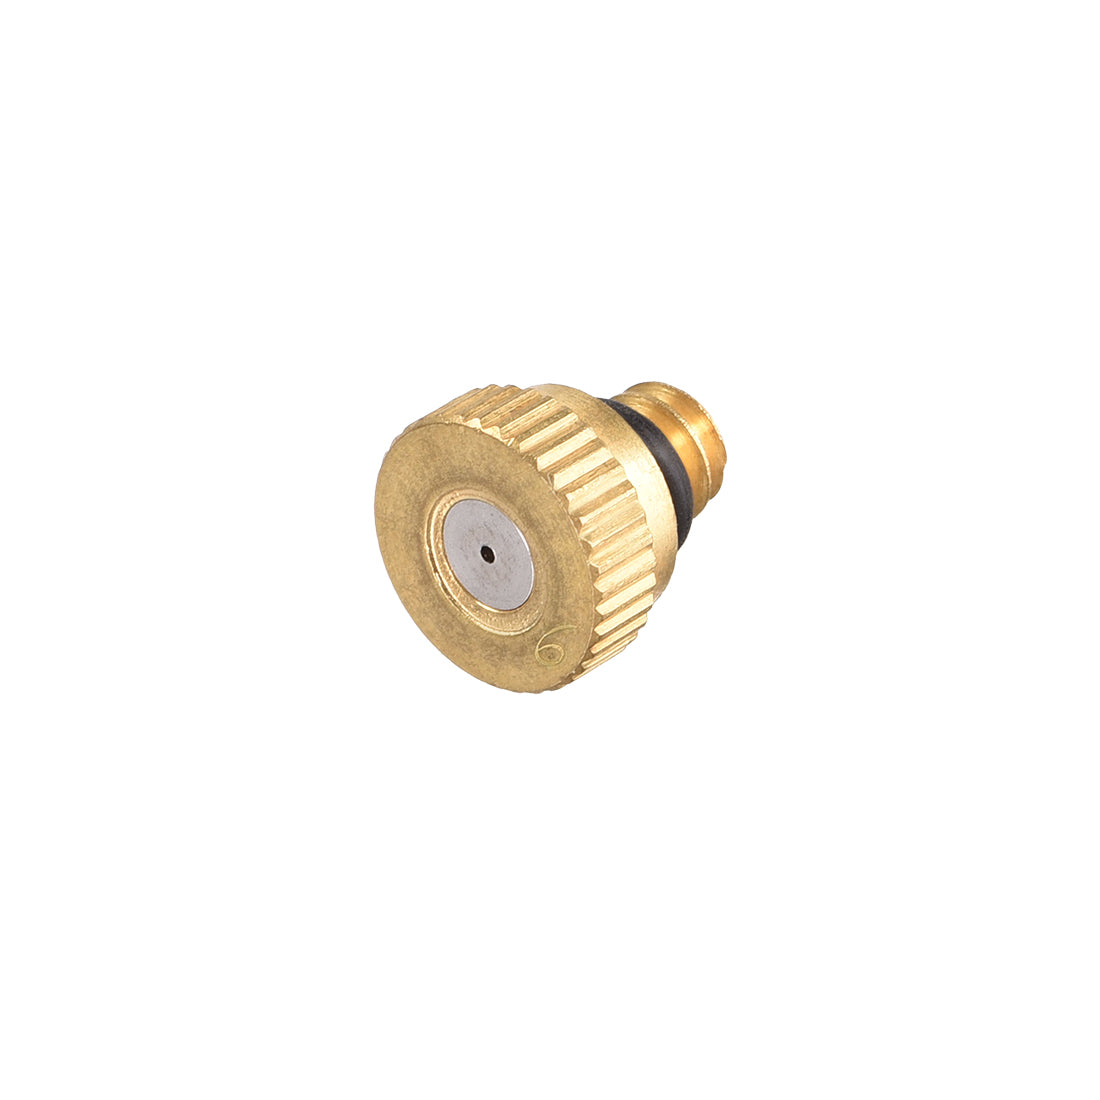 Uxcell Uxcell Brass Misting Nozzle - 10/24 UNC 0.6mm Orifice Dia Replacement Heads for Outdoor Cooling System